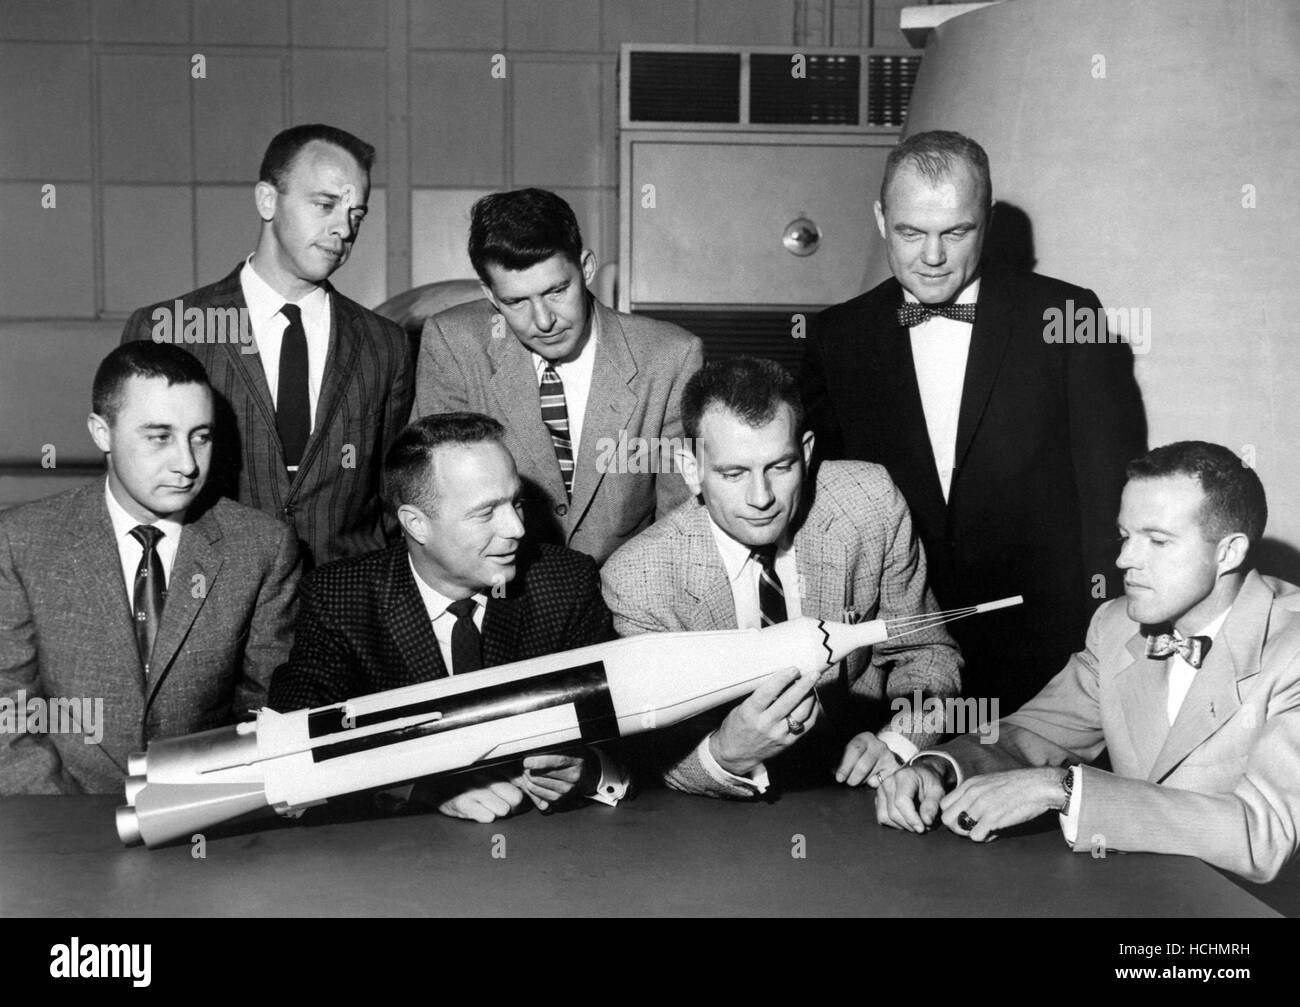 The Original 7 Mercury Astronauts are pictured around a table admiring an Atlas model on April 30, 1959. Standing, left to right are Alan B. Shepard, Jr., Walter M. Schirra, Jr., and John H. Glenn, Jr.; sitting, left to right are Virgil I. Grissom, M. Scott Carpenter, Donald Slayton, and L. Gordon Cooper, Jr. The Mercury 7 astronauts were introduced to the American public in April 1959. The seven criteria for selection were as follows: 1. less than 40 years old; 2. less than 5 foot 11 inches tall: 3. excellent physical condition; 4. bachelor's degree in engineering or equivalent; 5. test-pil Stock Photo